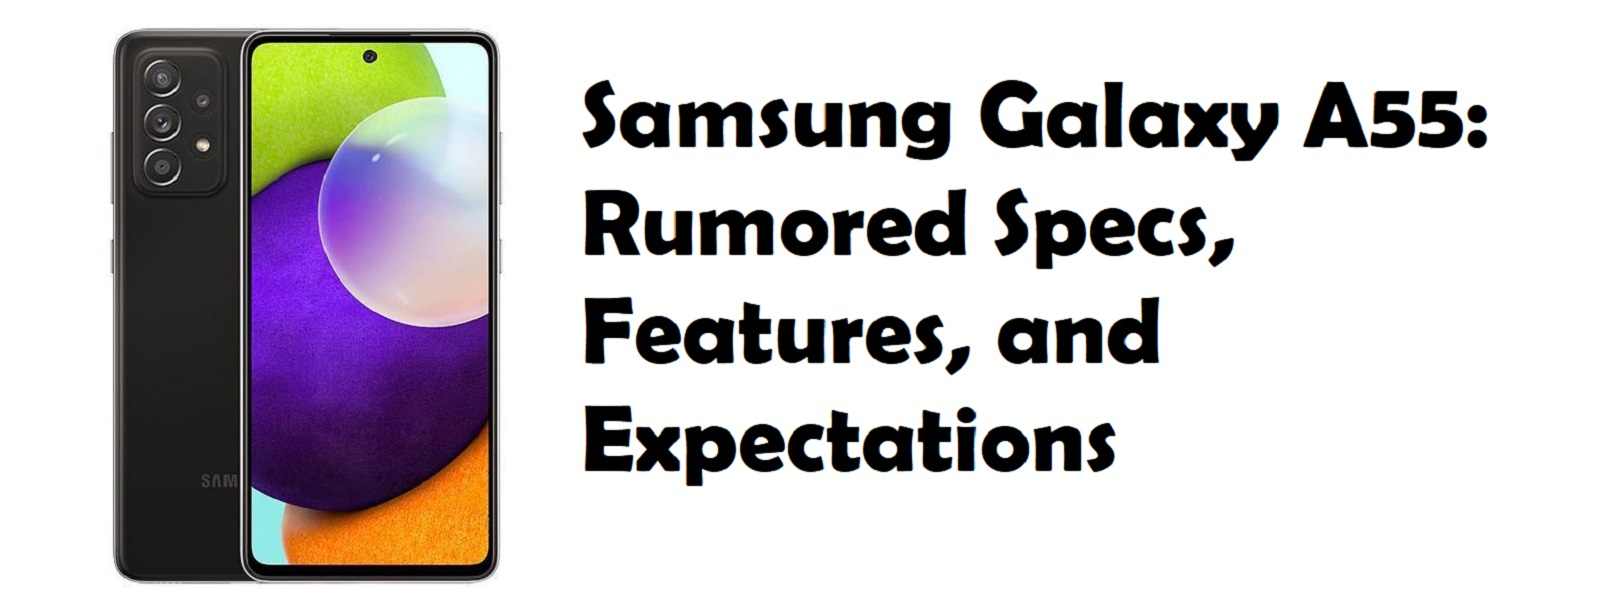 Samsung Galaxy A55: Features, and Expectations